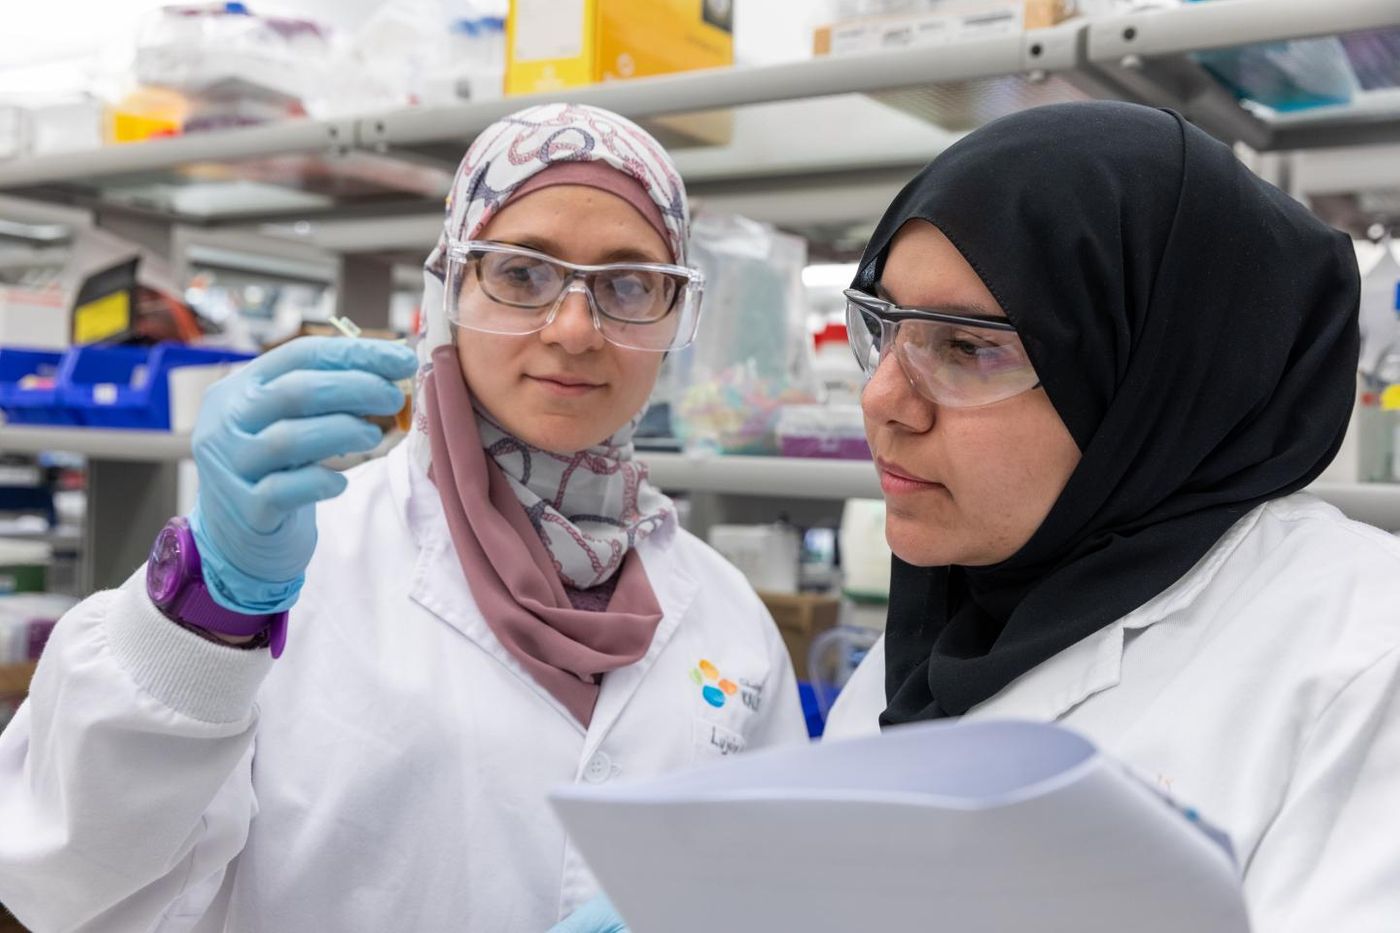 KAUST scientists develop AI that reveals genes driving tumor growth. Marwa Abdelhakim (left) and Sara Althubaiti are shown with some of the DNA library used in the study. / Credit: 2020 KAUST